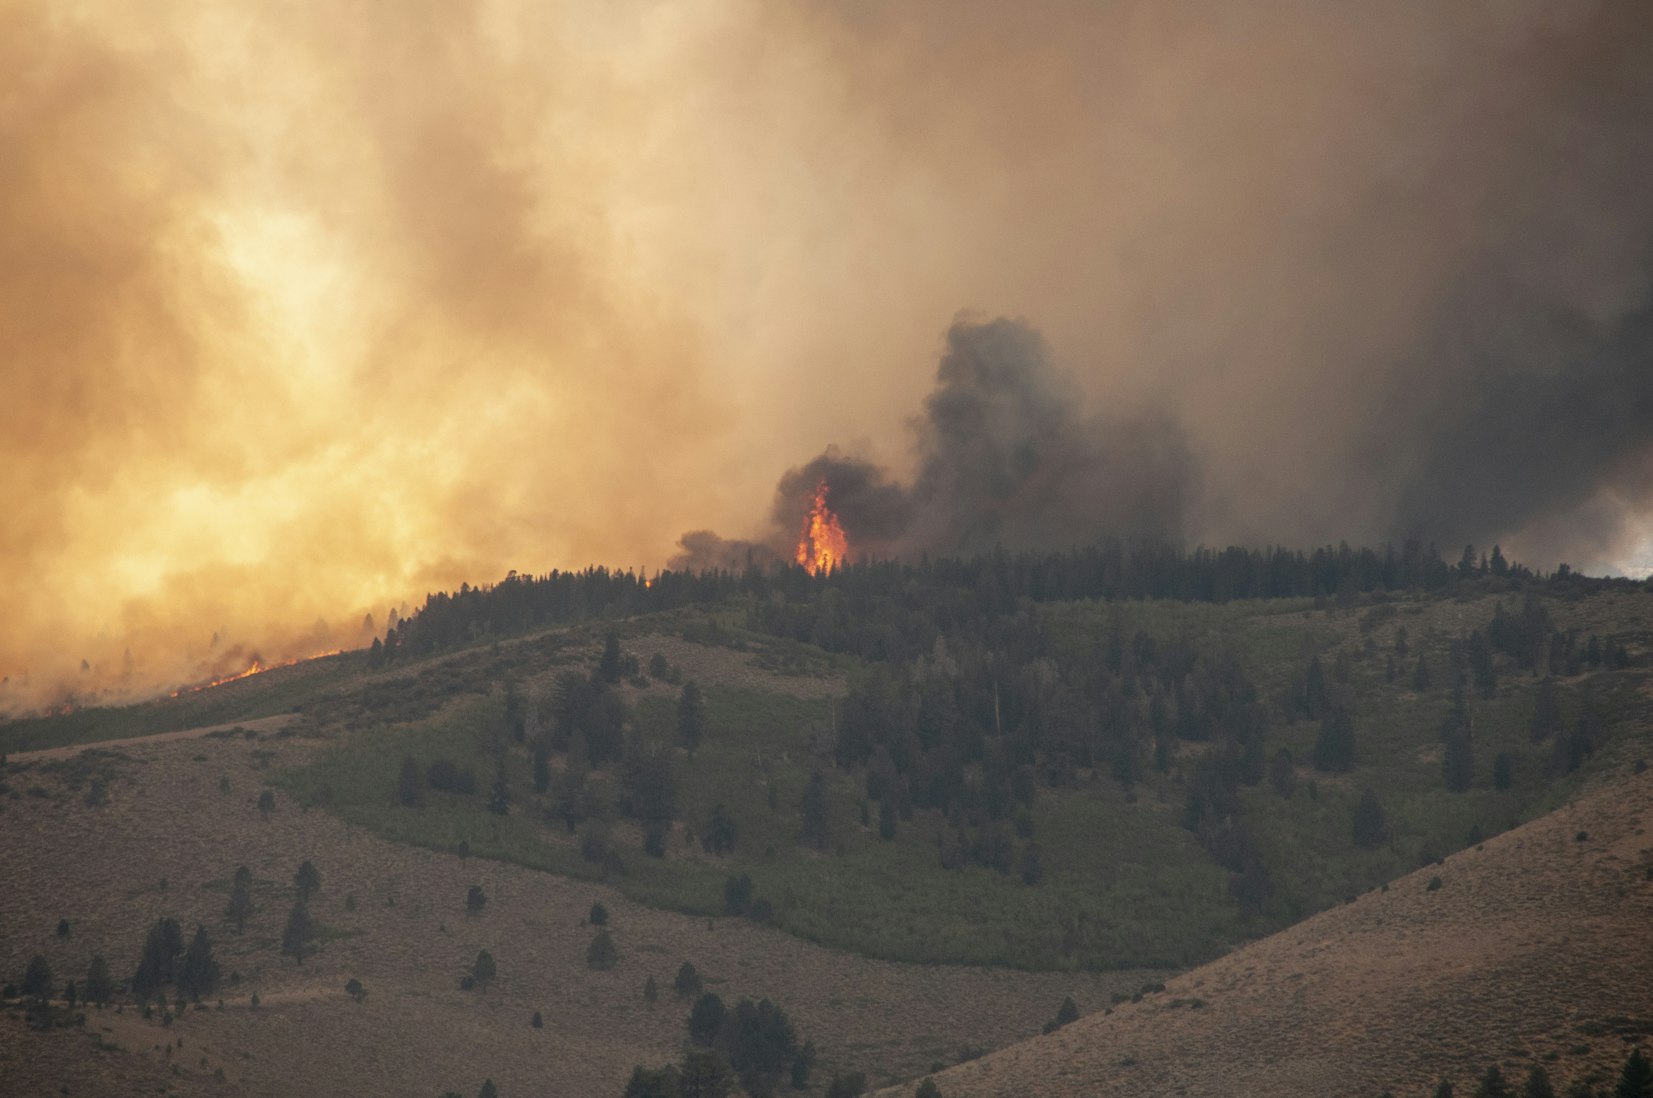 After Years of Political Gridlock, Oregon’s Fire Disaster Brings ‘New Reality’